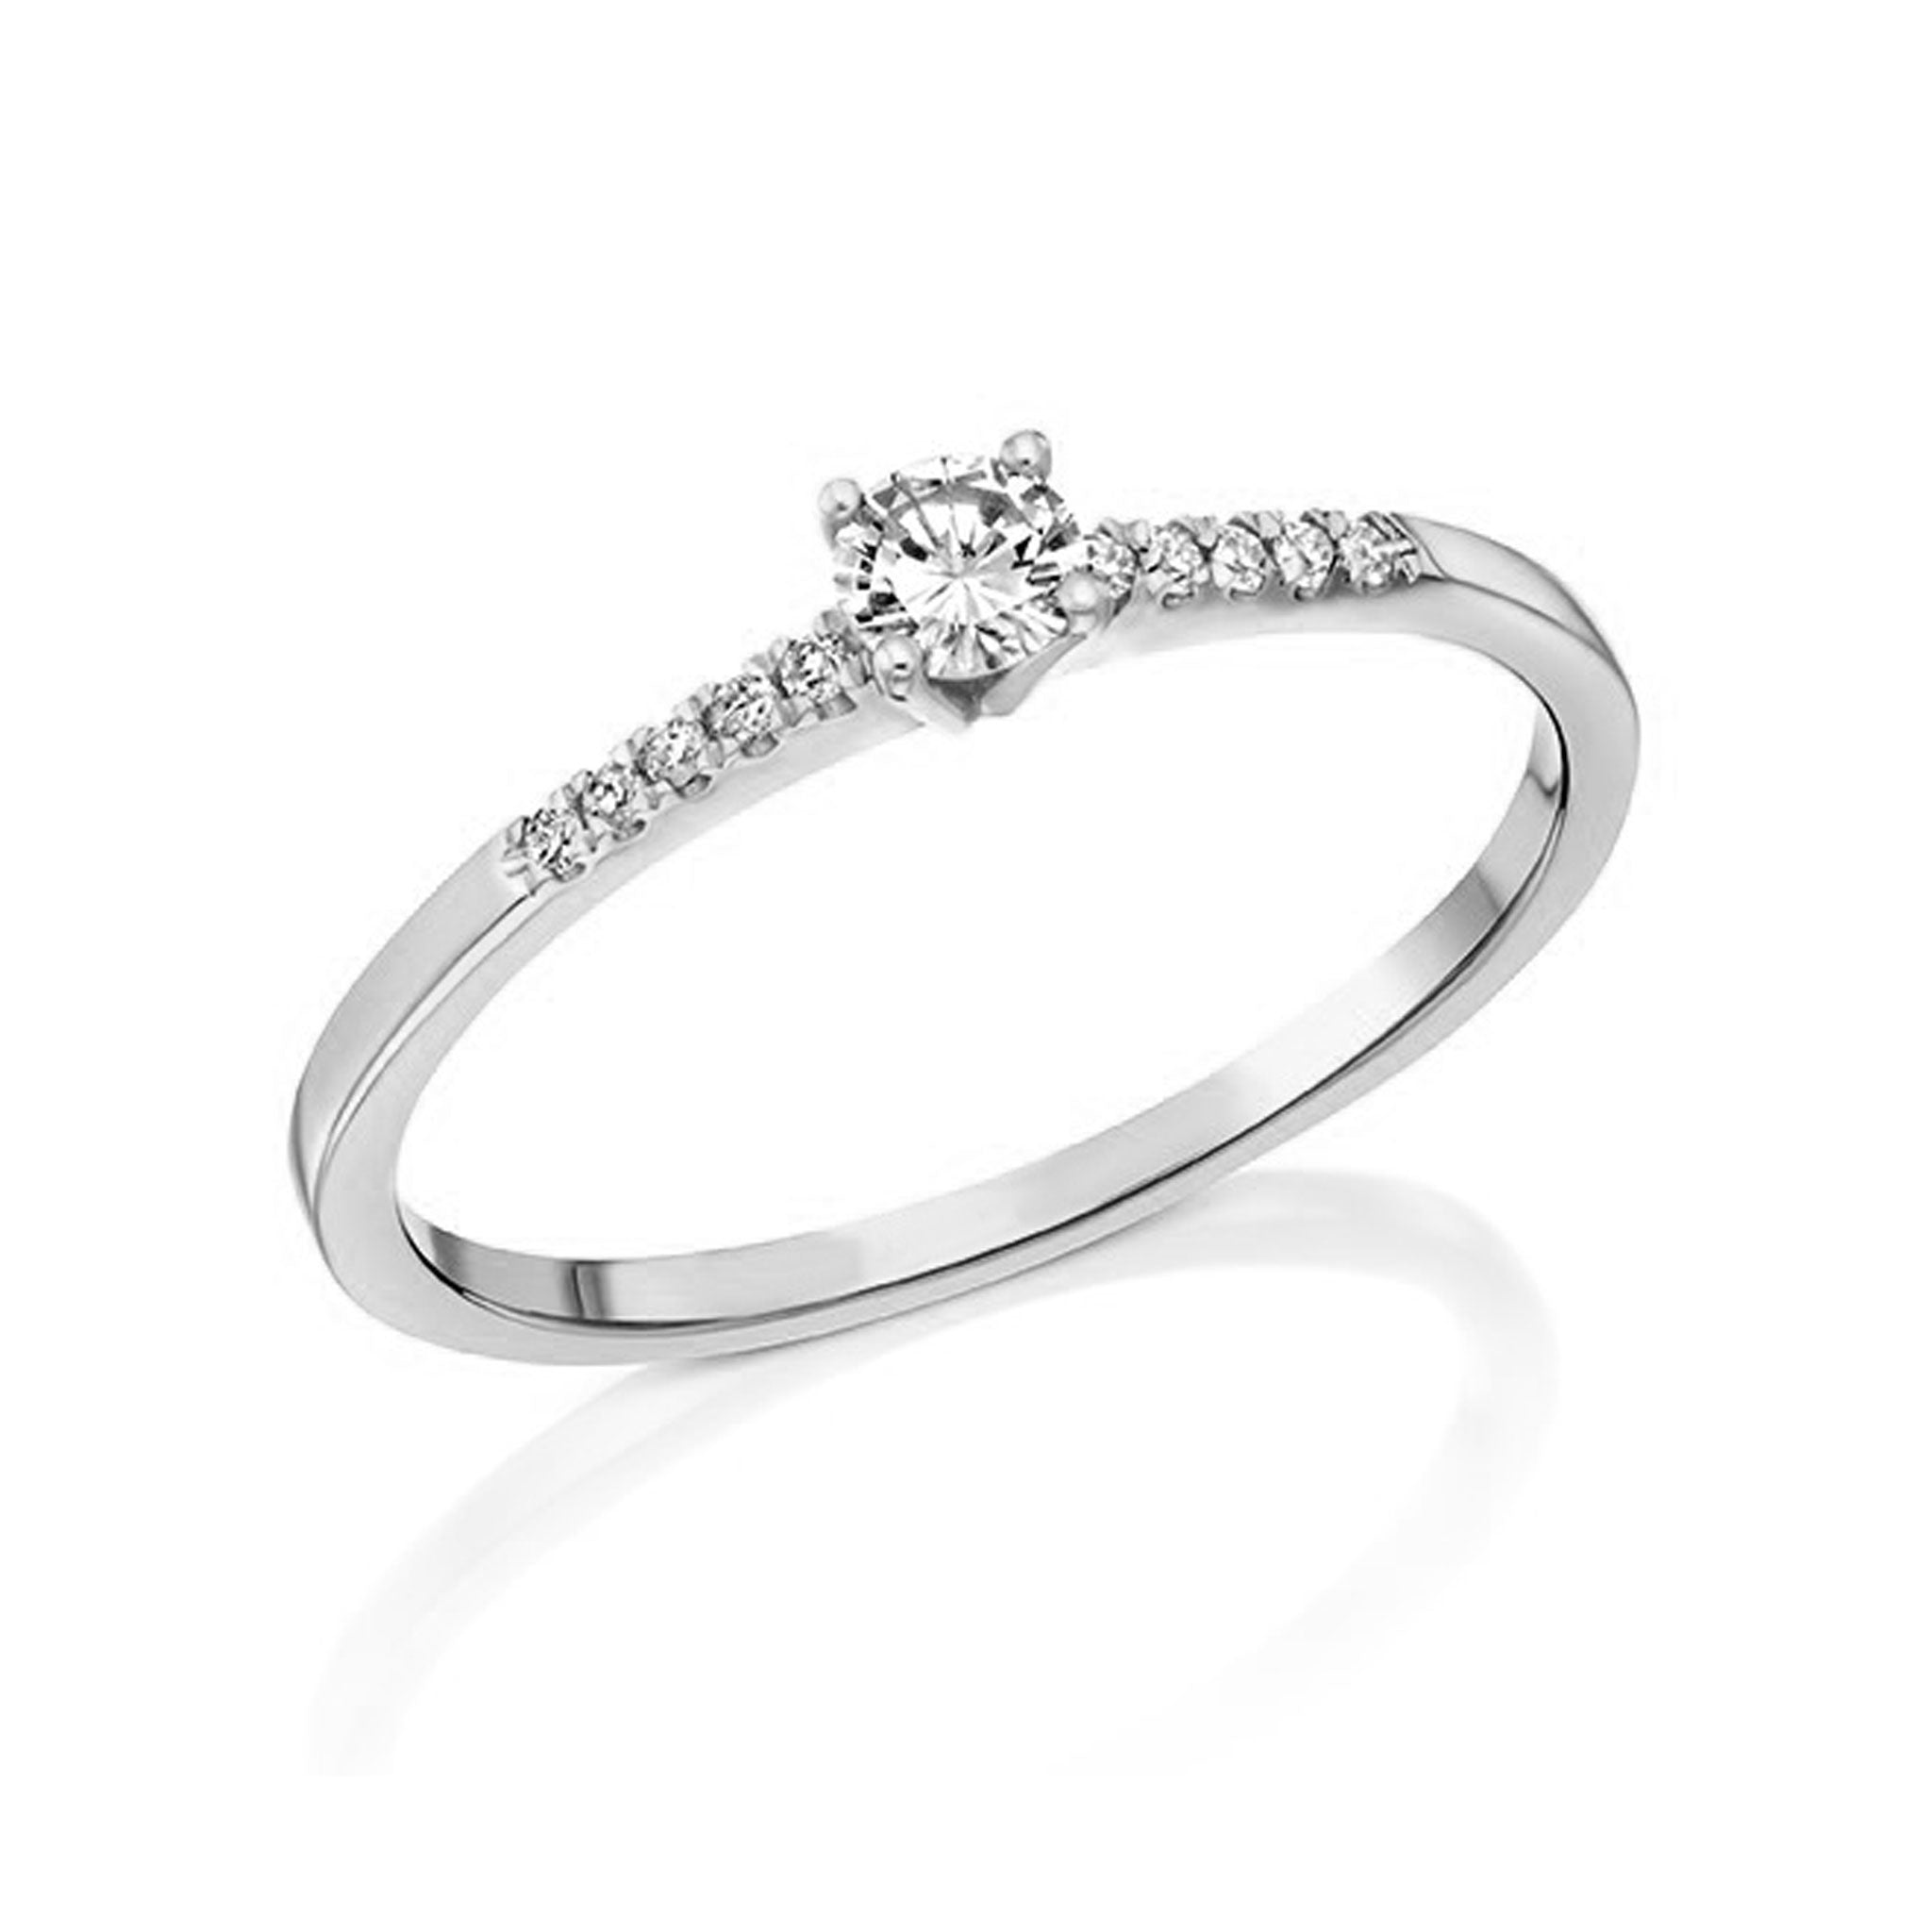 Buy Fab & Floral Diamond Engagement Ring Online